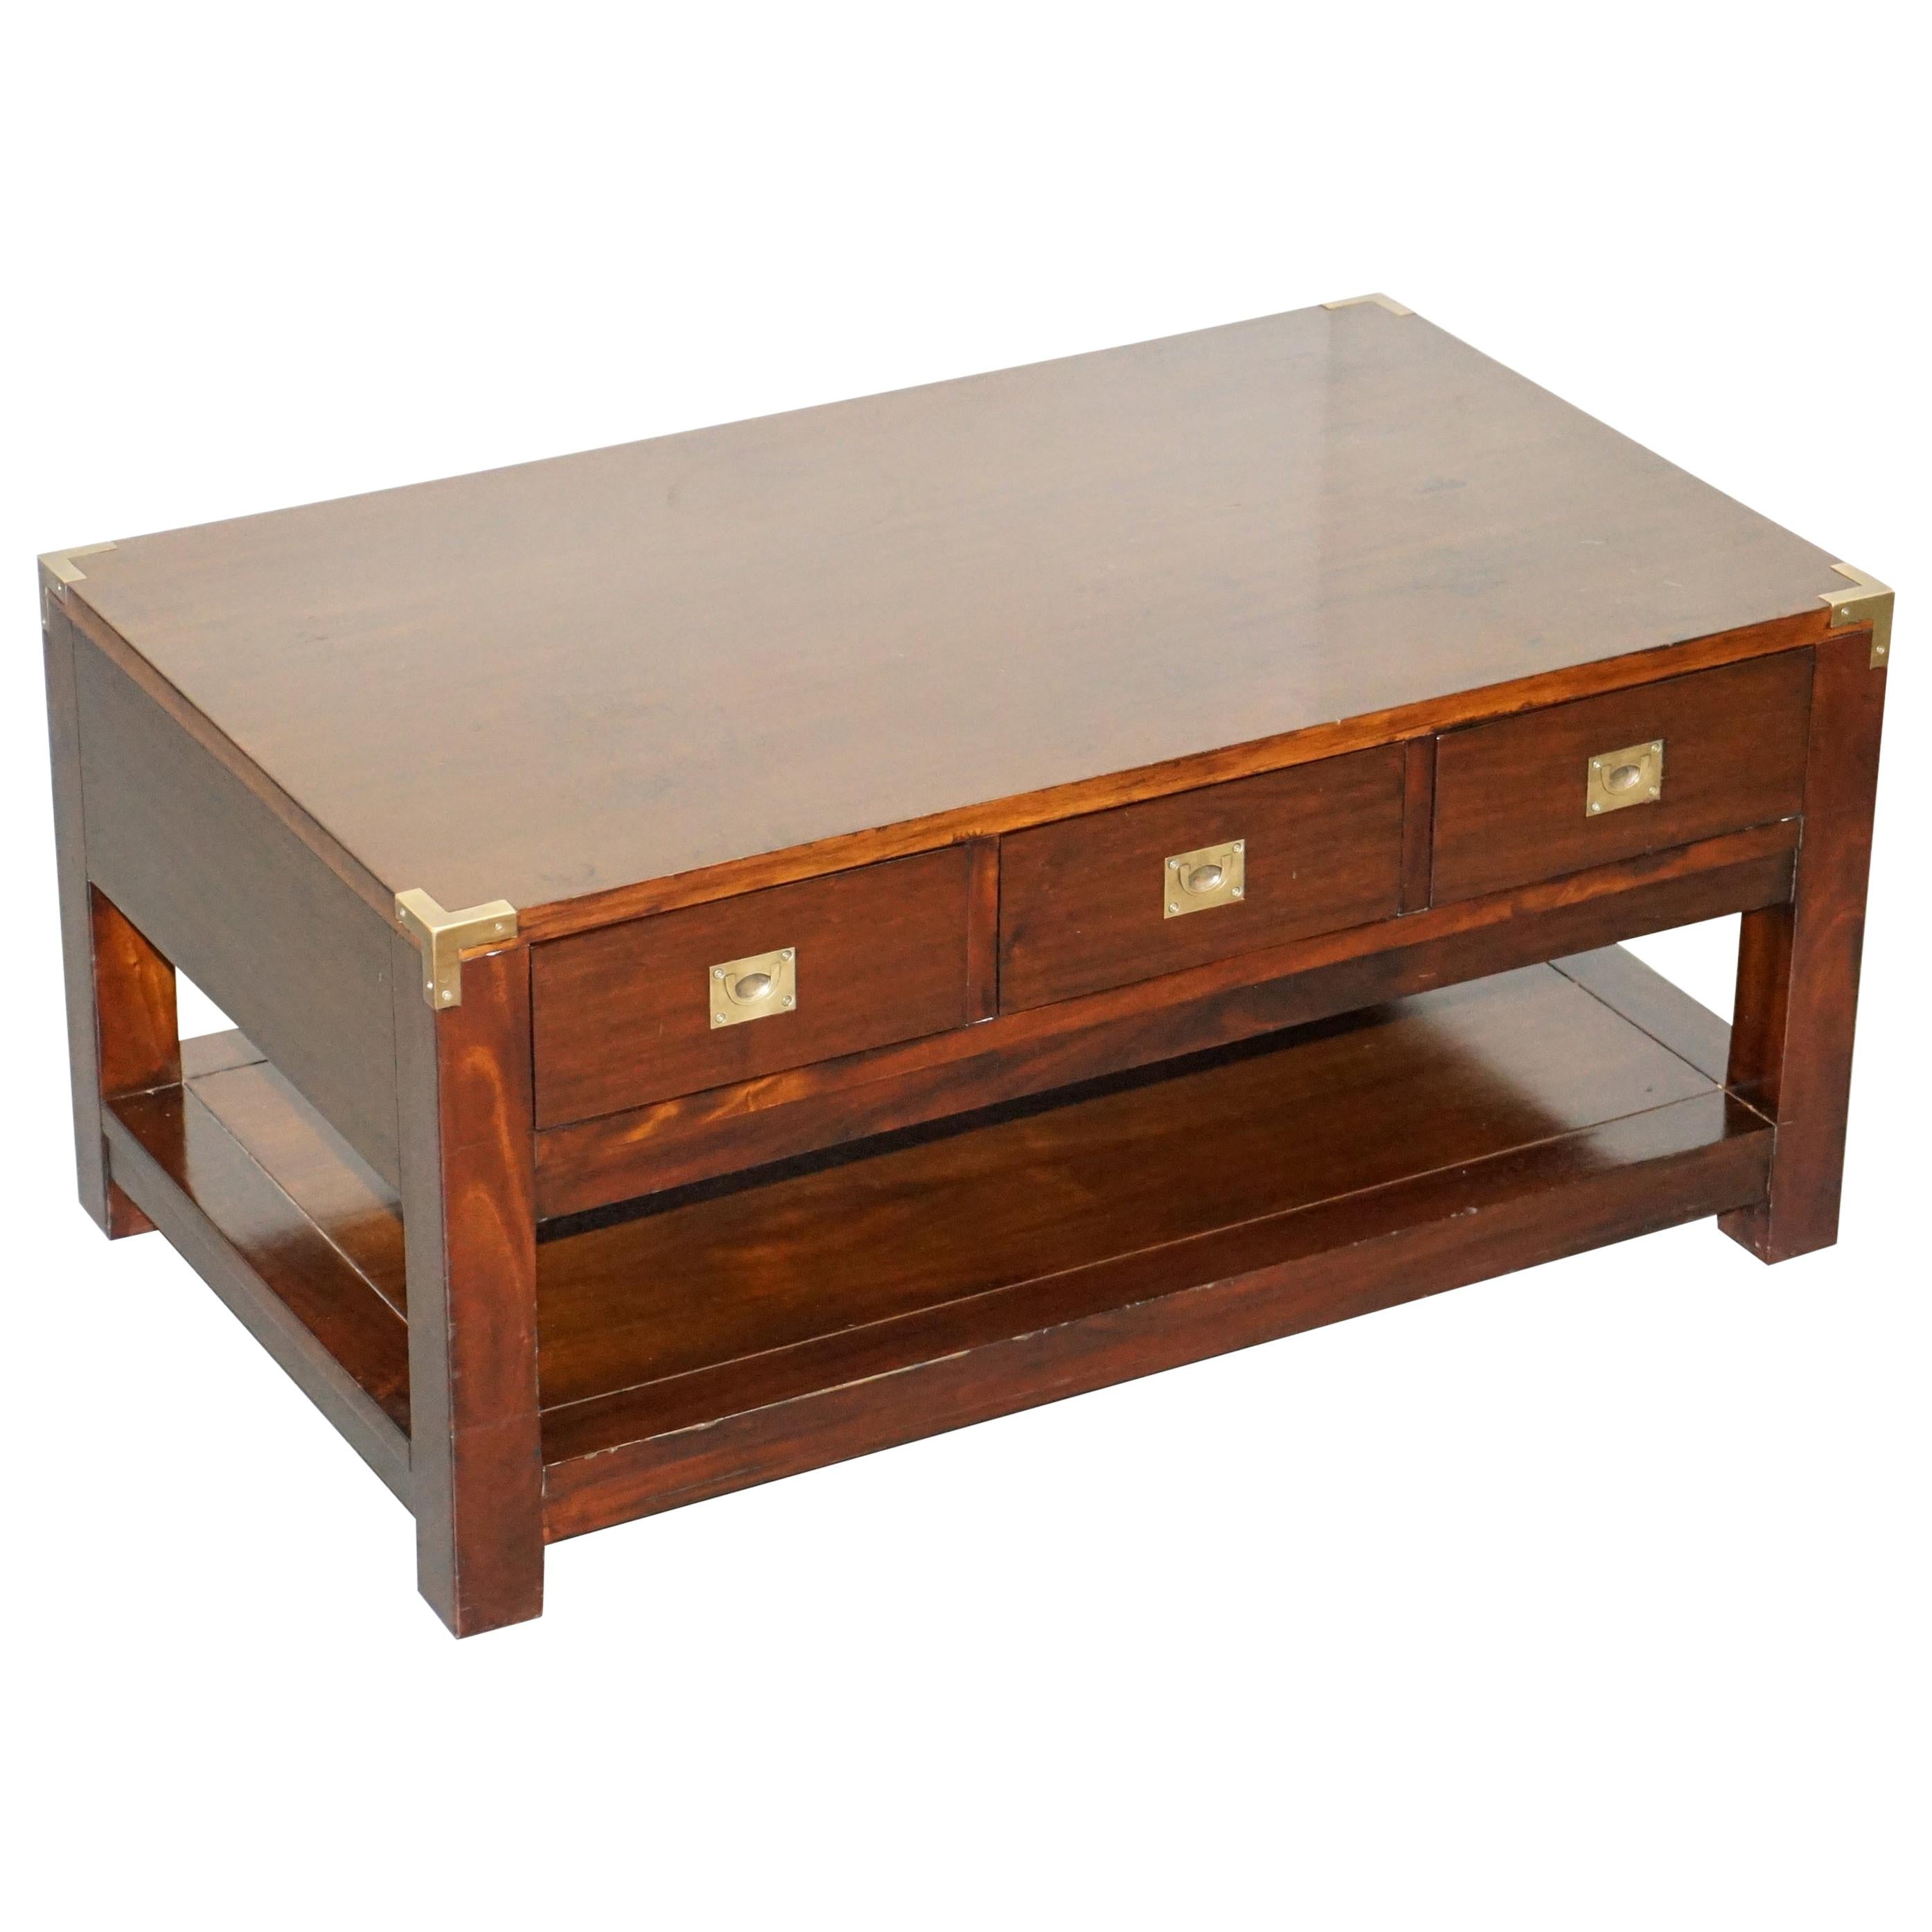 Substantial Military Campaign Style Hardwood and Brass Coffee Table with Drawers For Sale